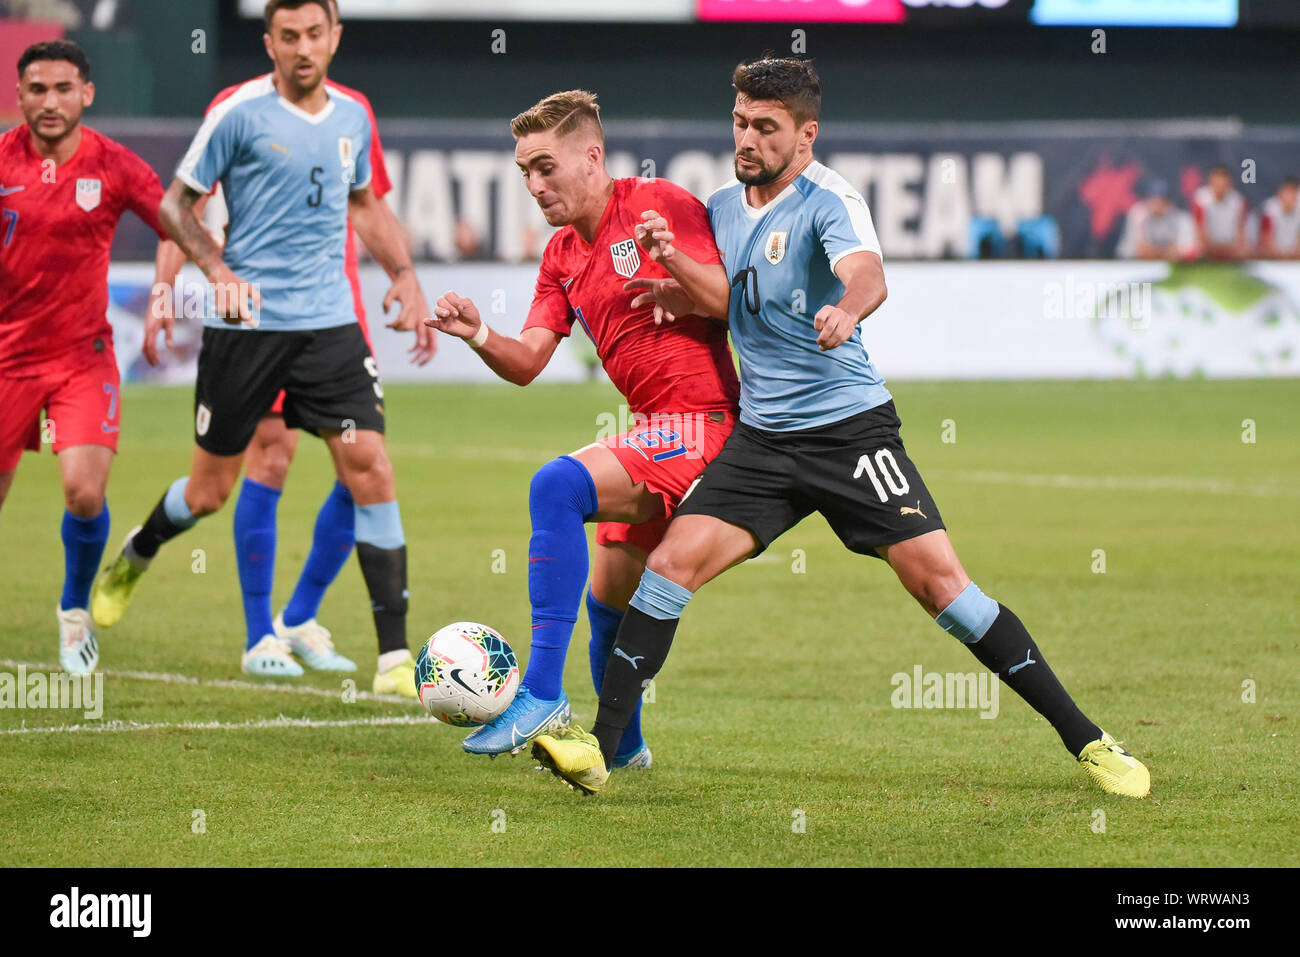 St. Louis, Missouri, USA. 10th Sep, 2019. Uruguay midfielder Giorgian De Arrascaeta (10) bumps US Men's National Team forward Tyler Boyd (21) pushing the ball out of bounds during the final match before the Concacaf Nations League as the United States Men's National Team hosted Uruguay at Busch Stadium in St. Louis City, MO Ulreich/CSM/Alamy Live News Stock Photo